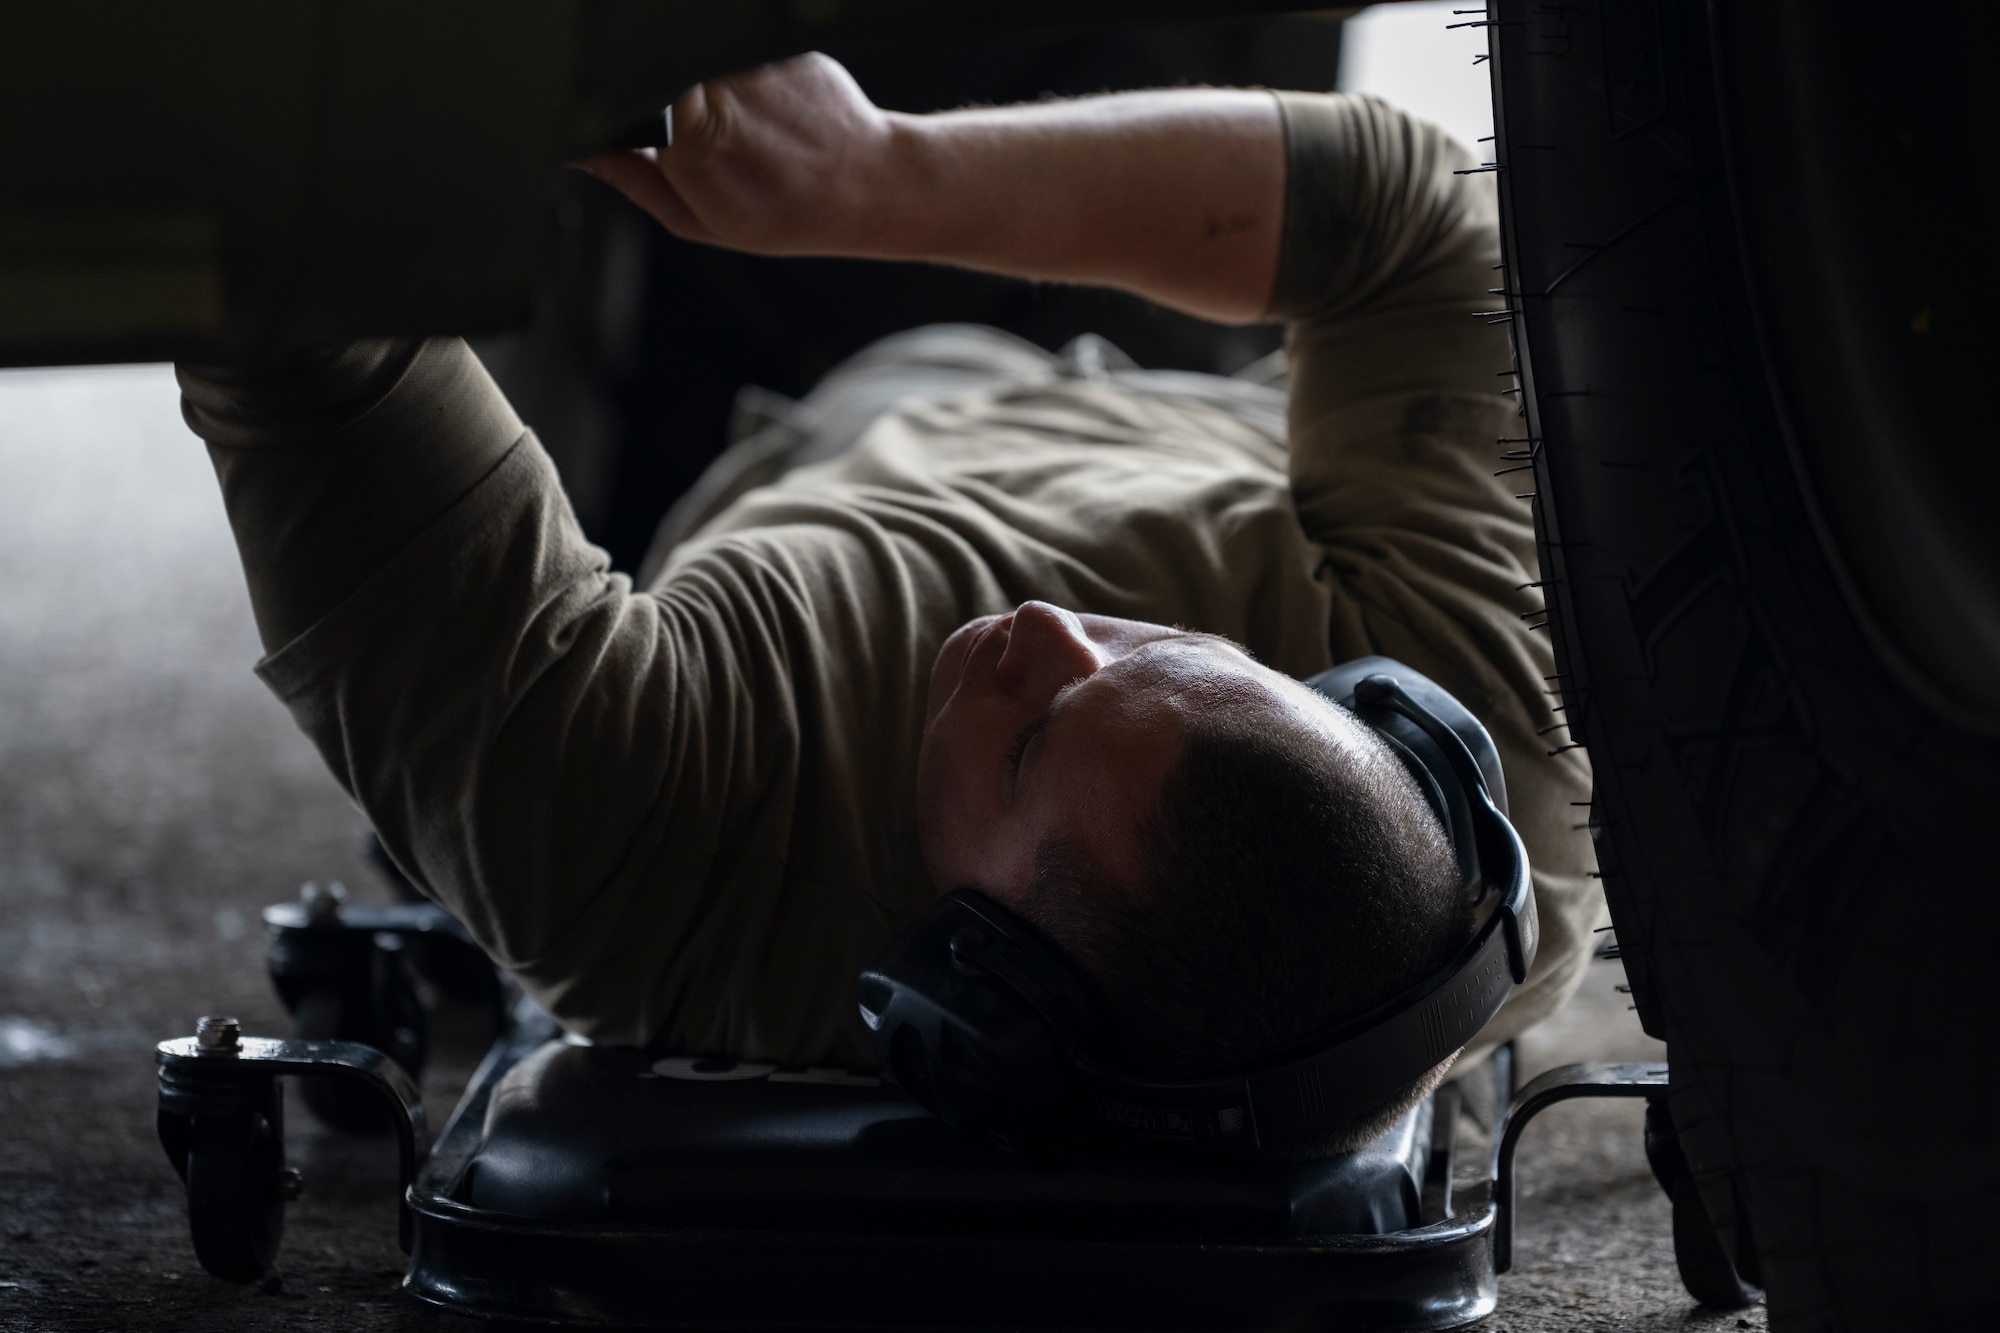 A photo of an Airman laying on his back on a wheeling chair/device reaching into the under carriage of a forklift.